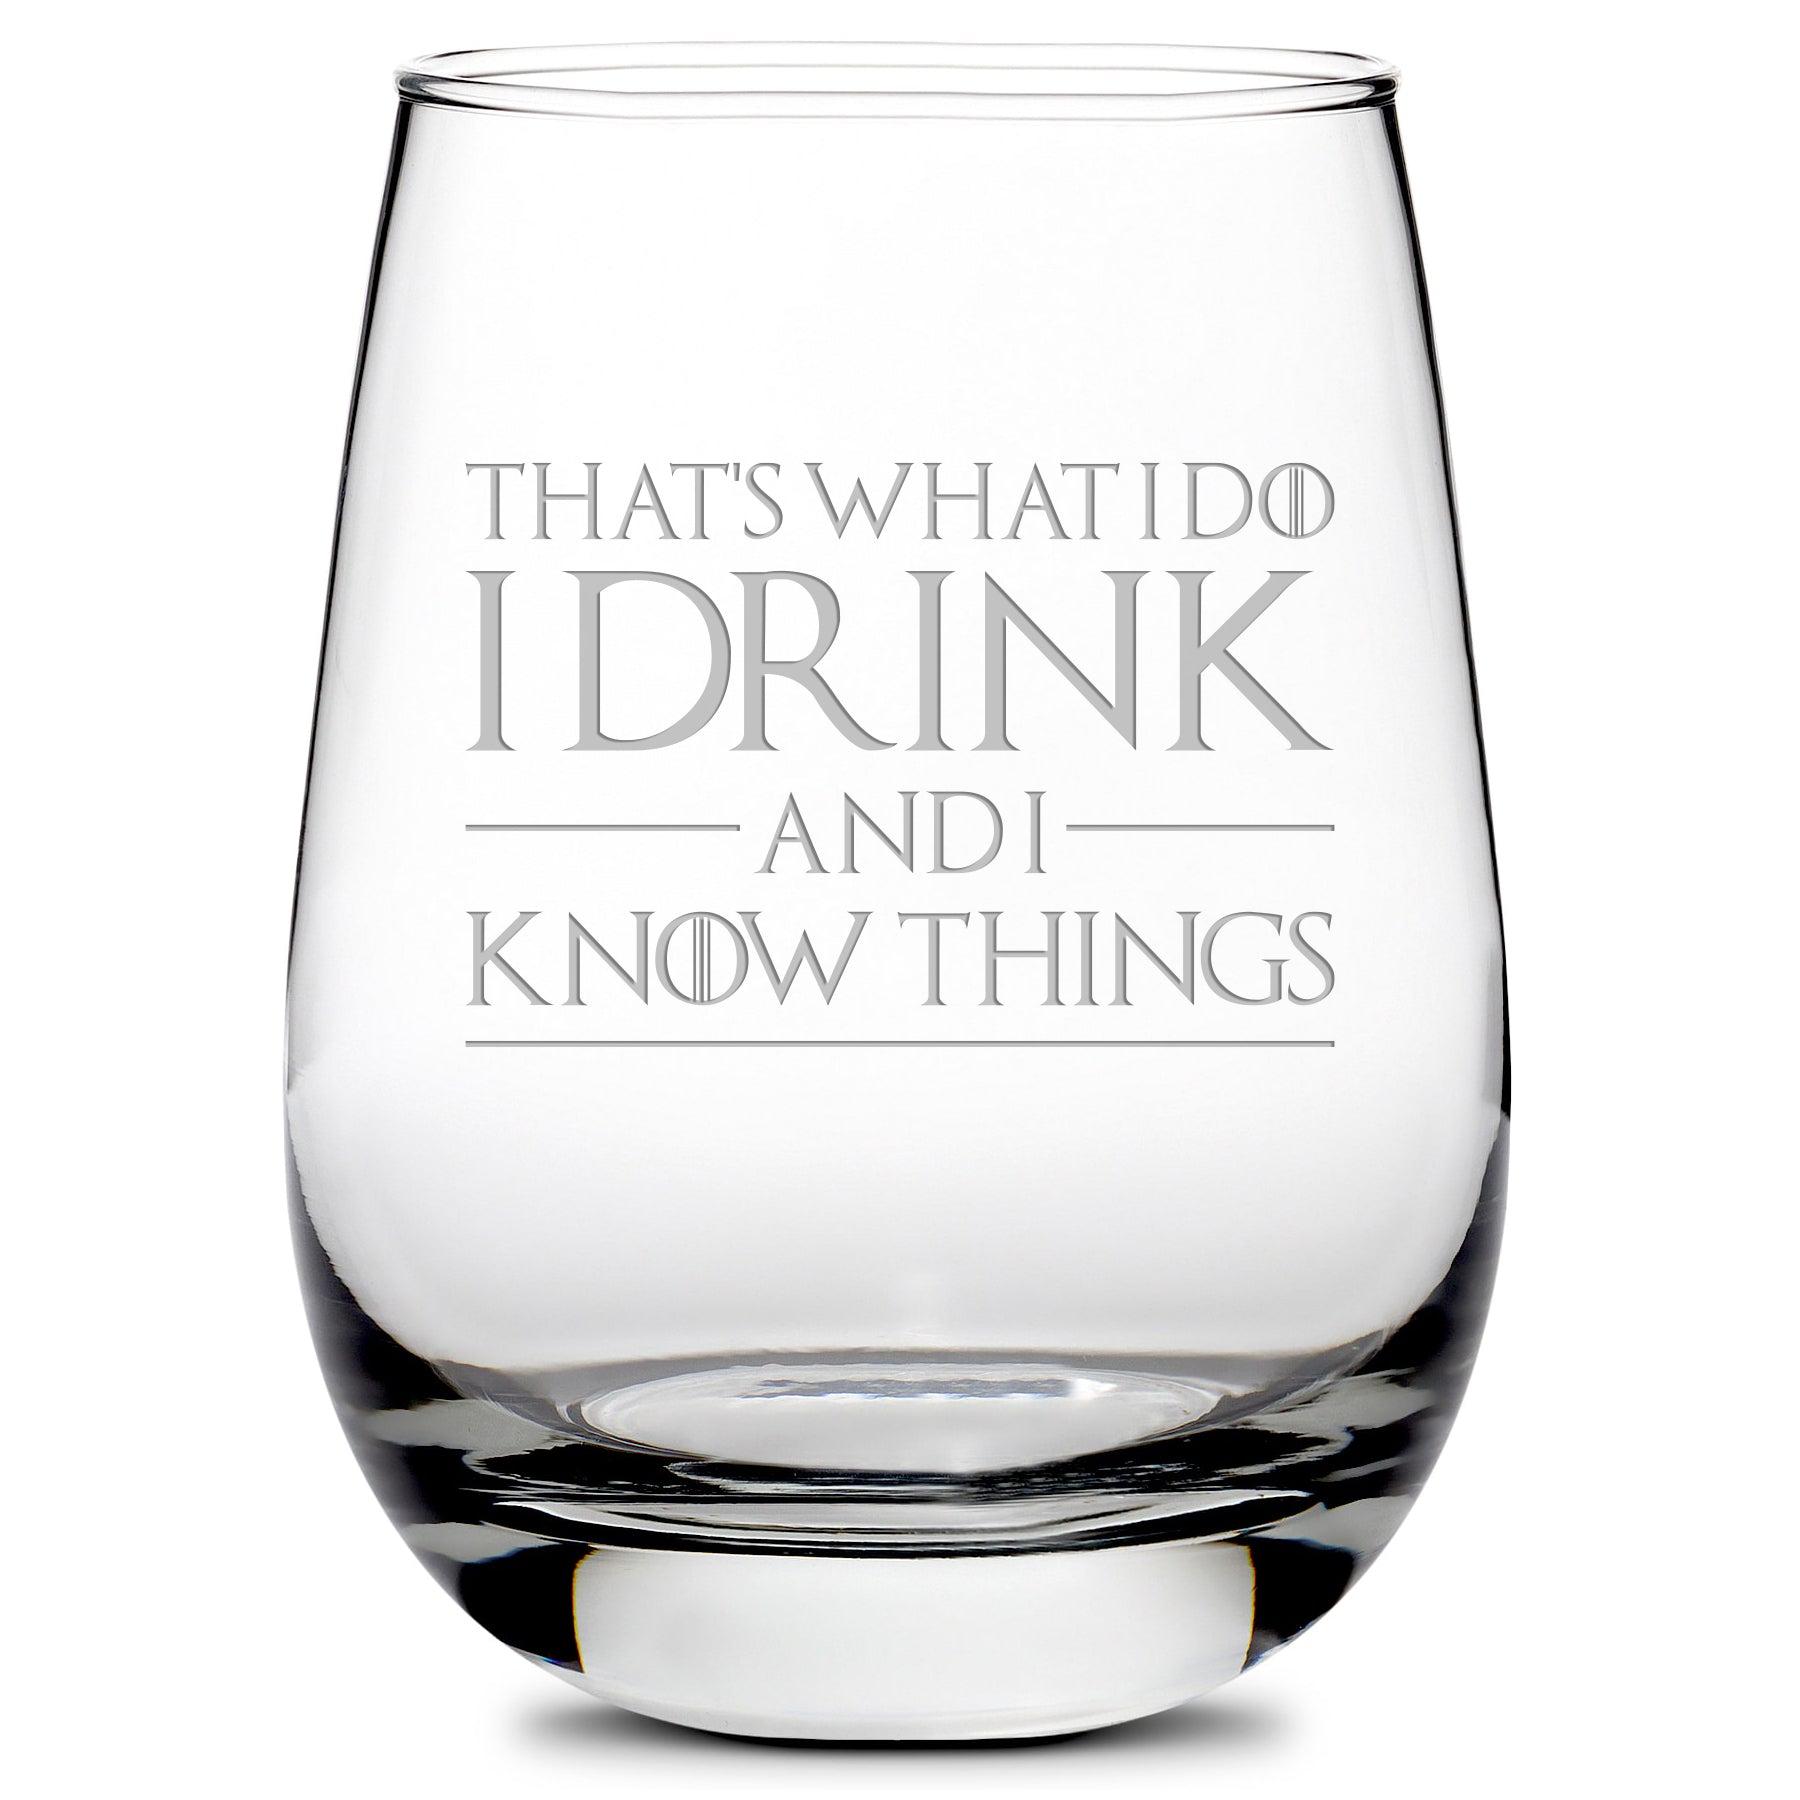 Premium Wine Glass, Game of Thrones, I Drink and I Know Things, 16oz, Laser Etched or Hand Etched